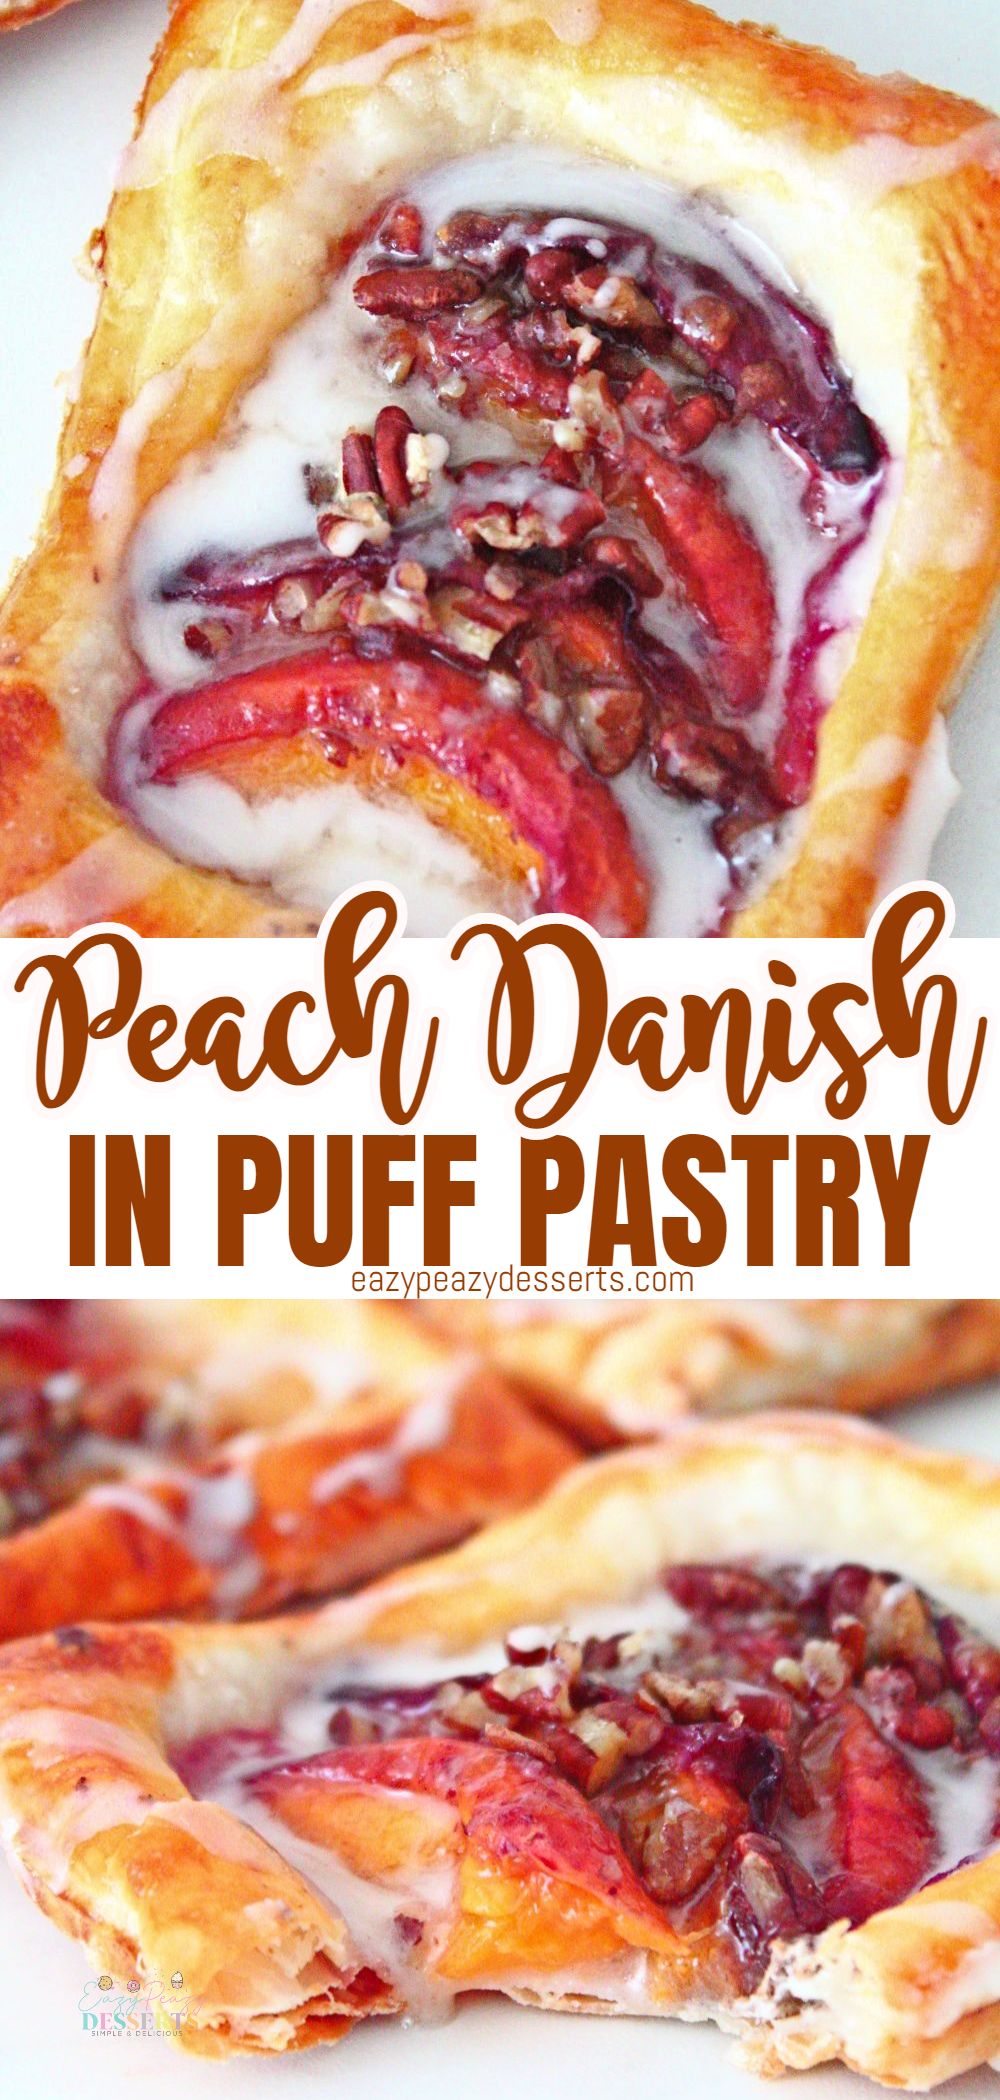 Photo collage of peach Danish treats made with fresh peaches and puff pastry